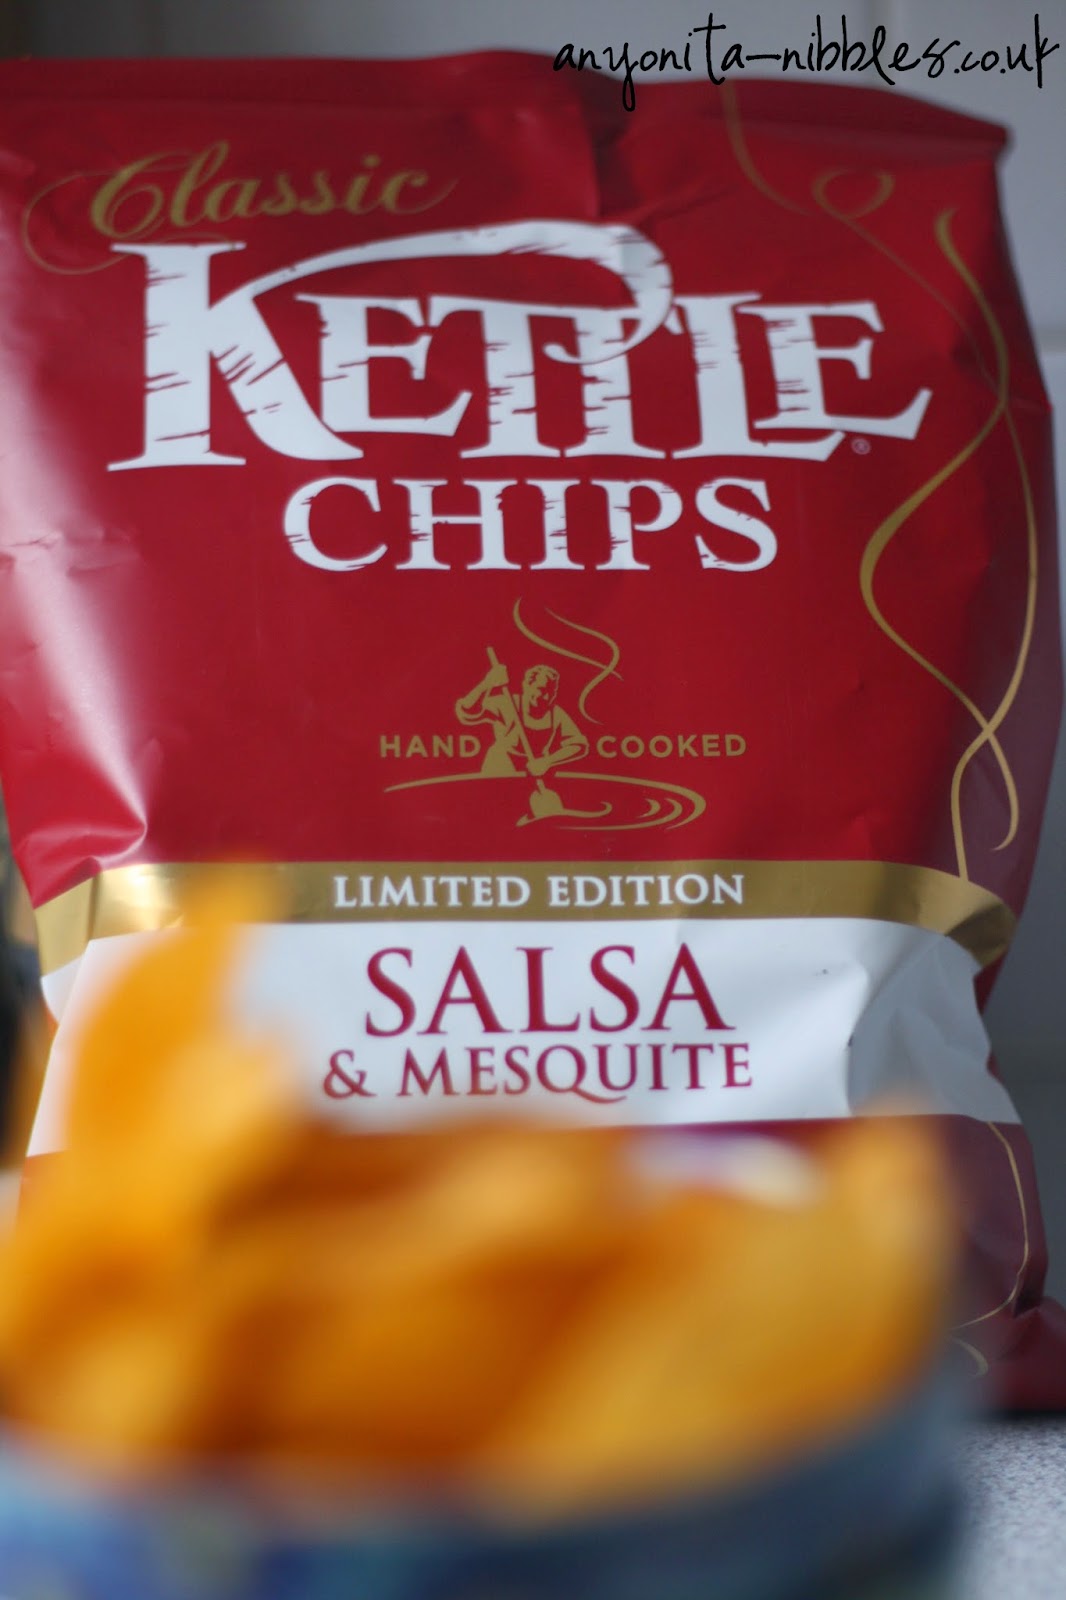 Kettle Chips for Christmas from Anyonita-nibbles.co.uk